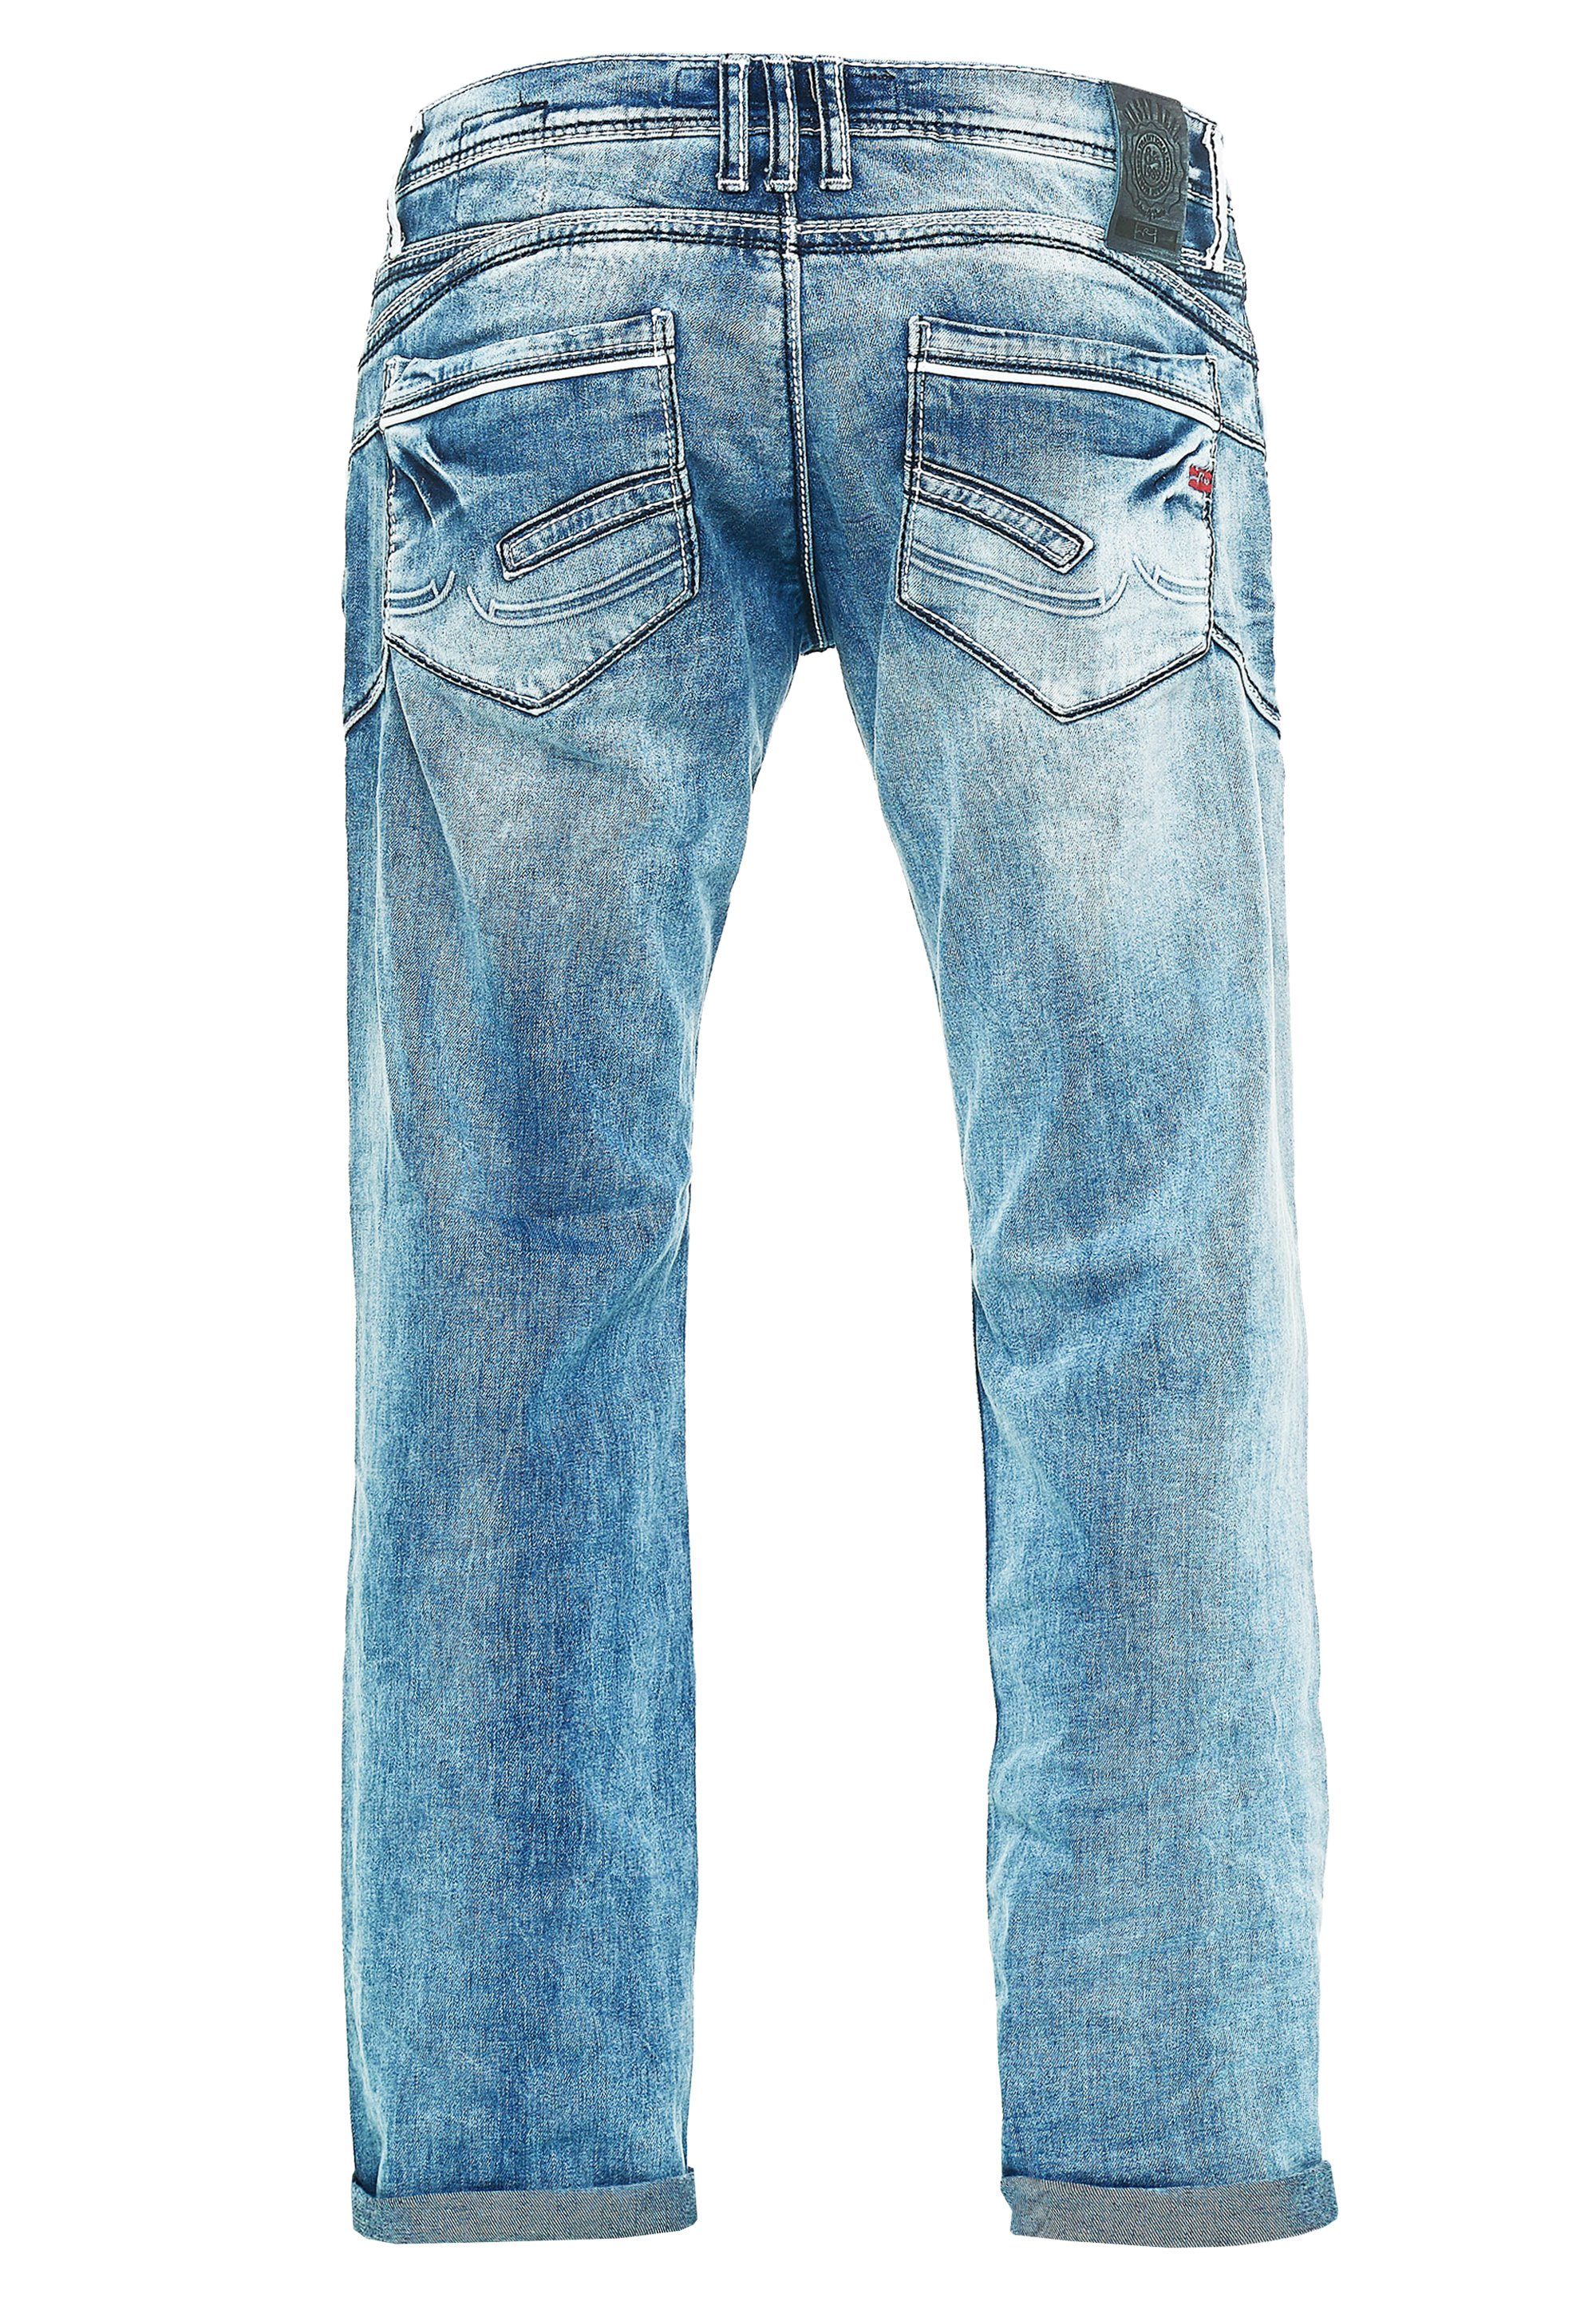 Jeans Rusty Neal Bequeme Waschung cooler mit